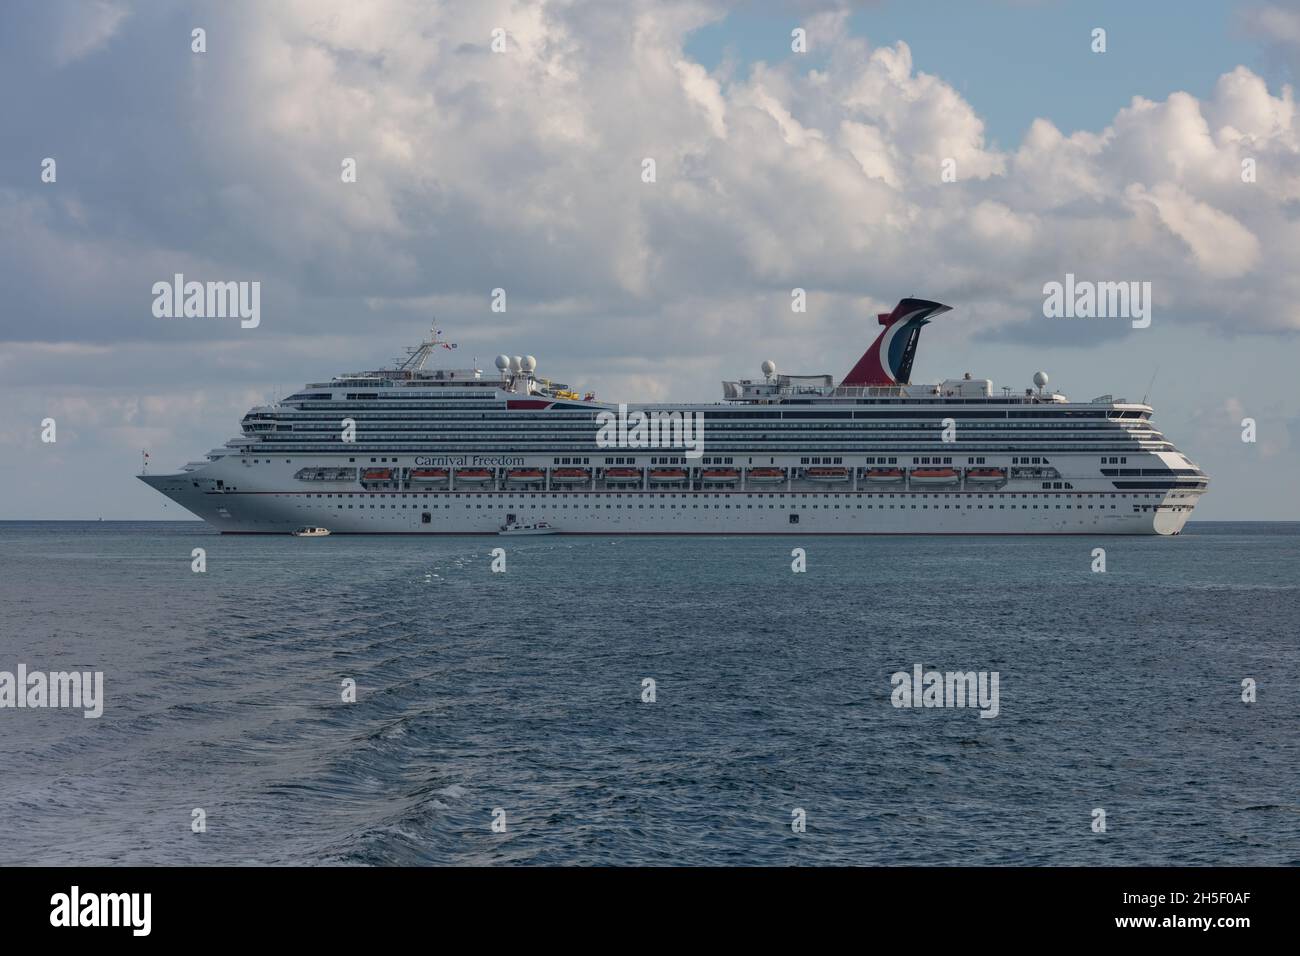 Belize coast - January 1, 2020: Aerial shot of Carnival Freedom anchored off the coast of Belize and two small tender boats by her side. Blue sky and Stock Photo